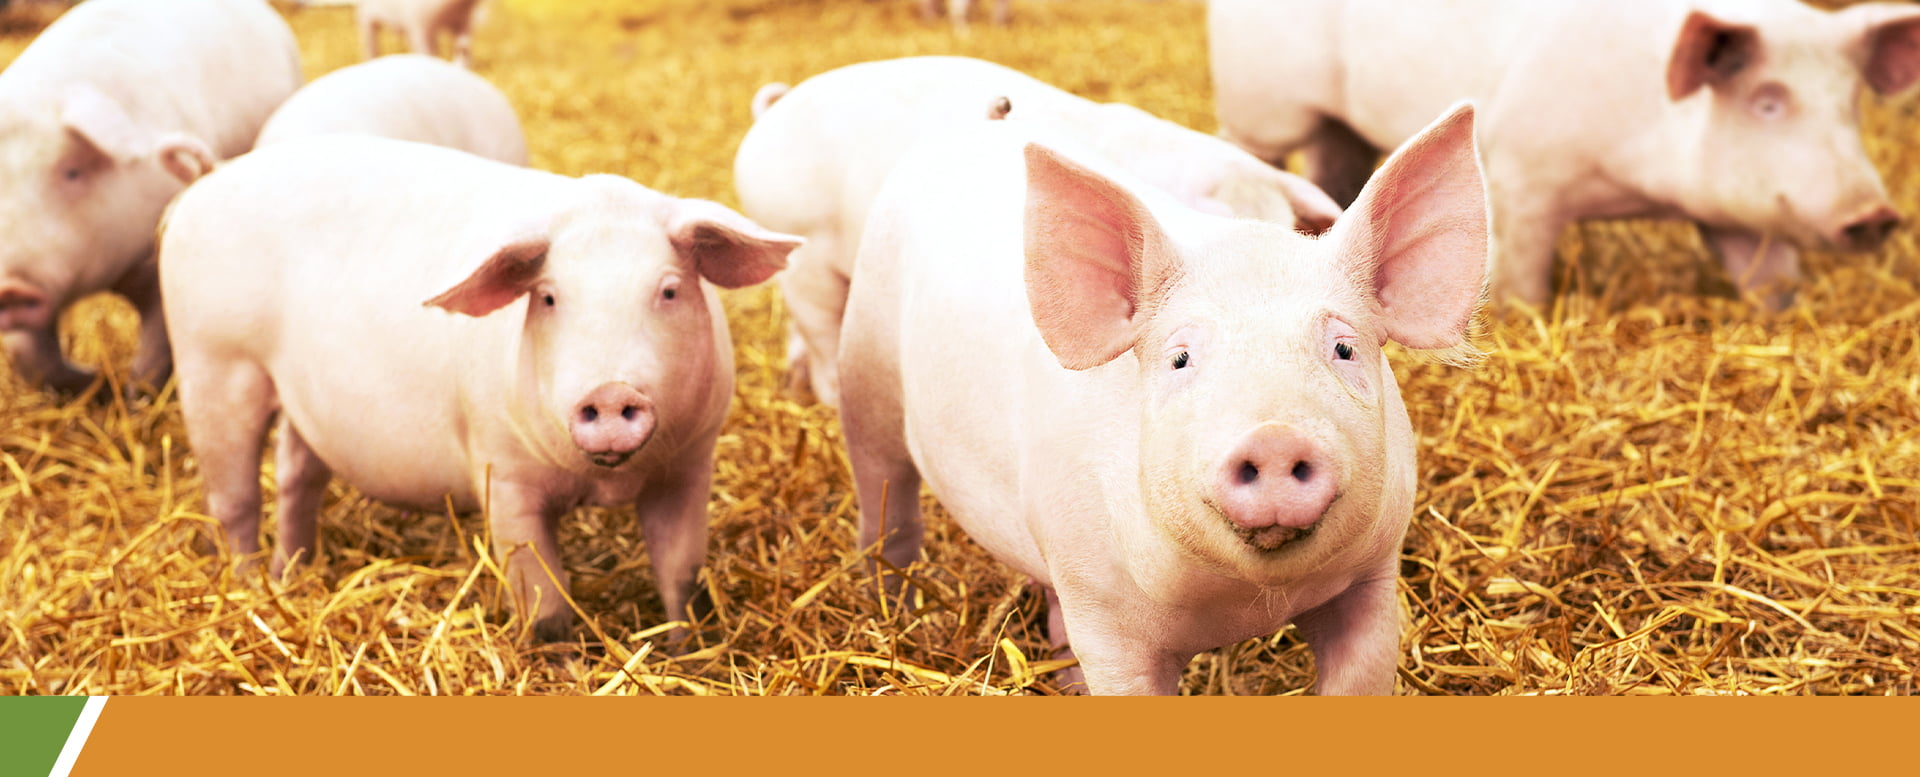 Importance of biosecurity programs for prudent use of antibiotics in pig farming